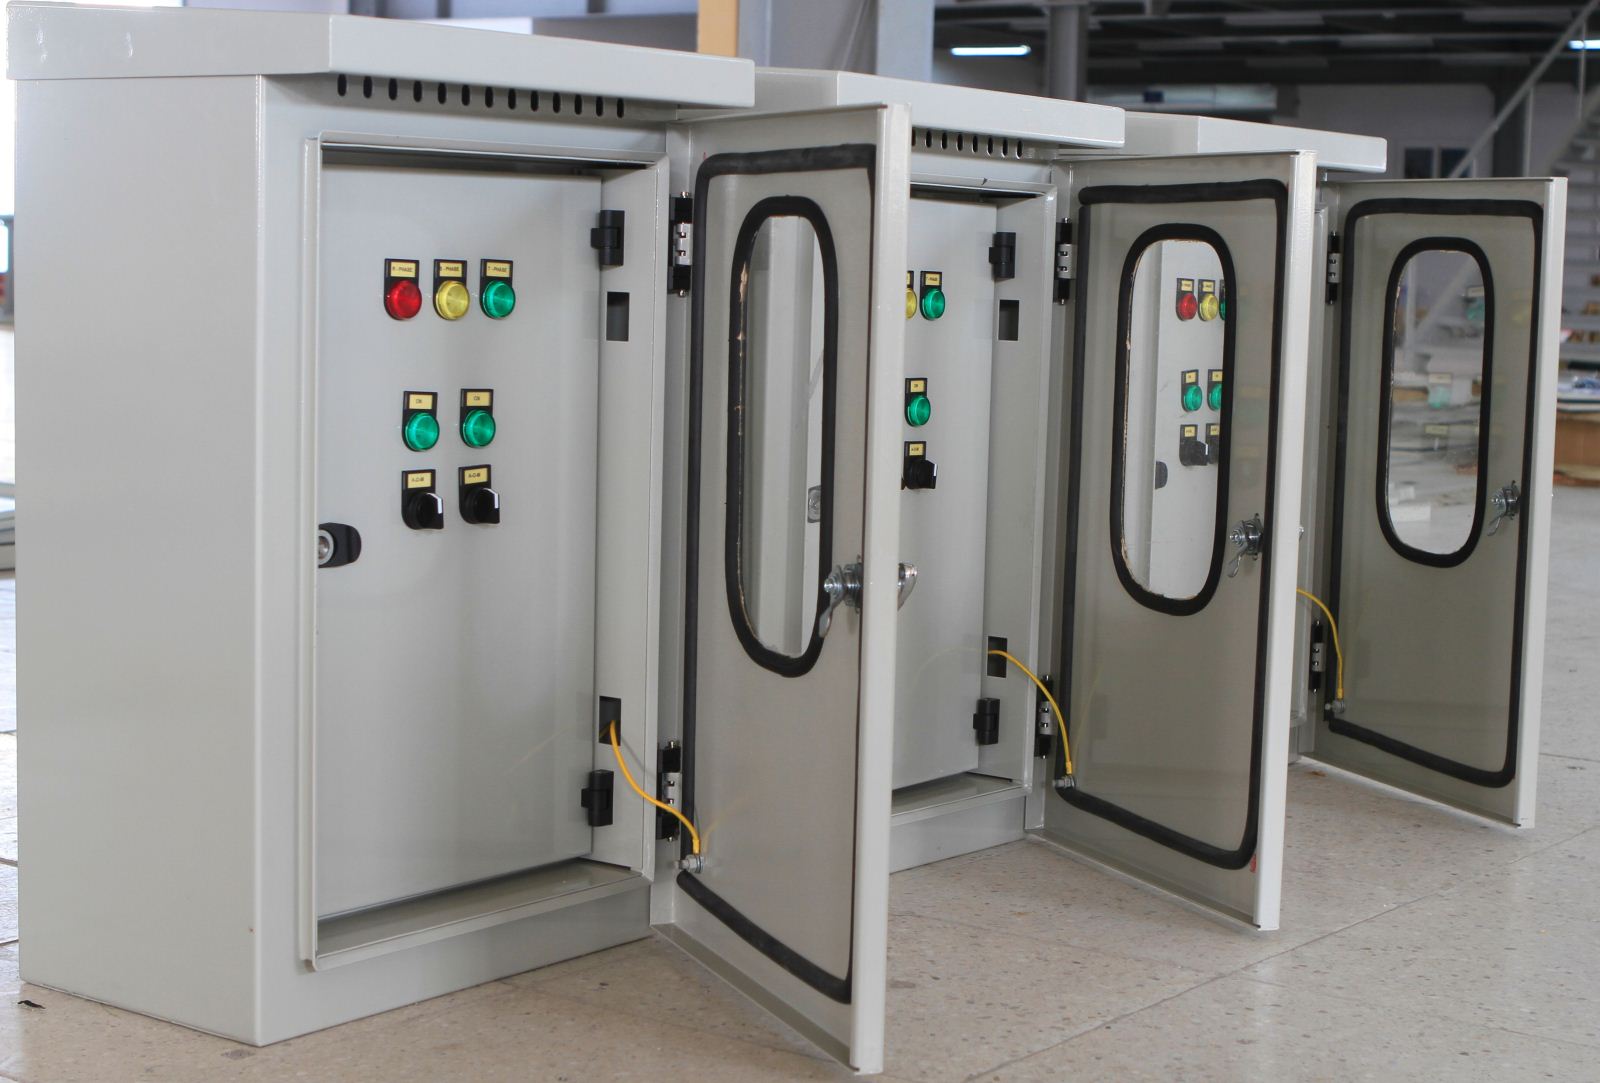 5 steps of manufacturing industrial electrical cabinets